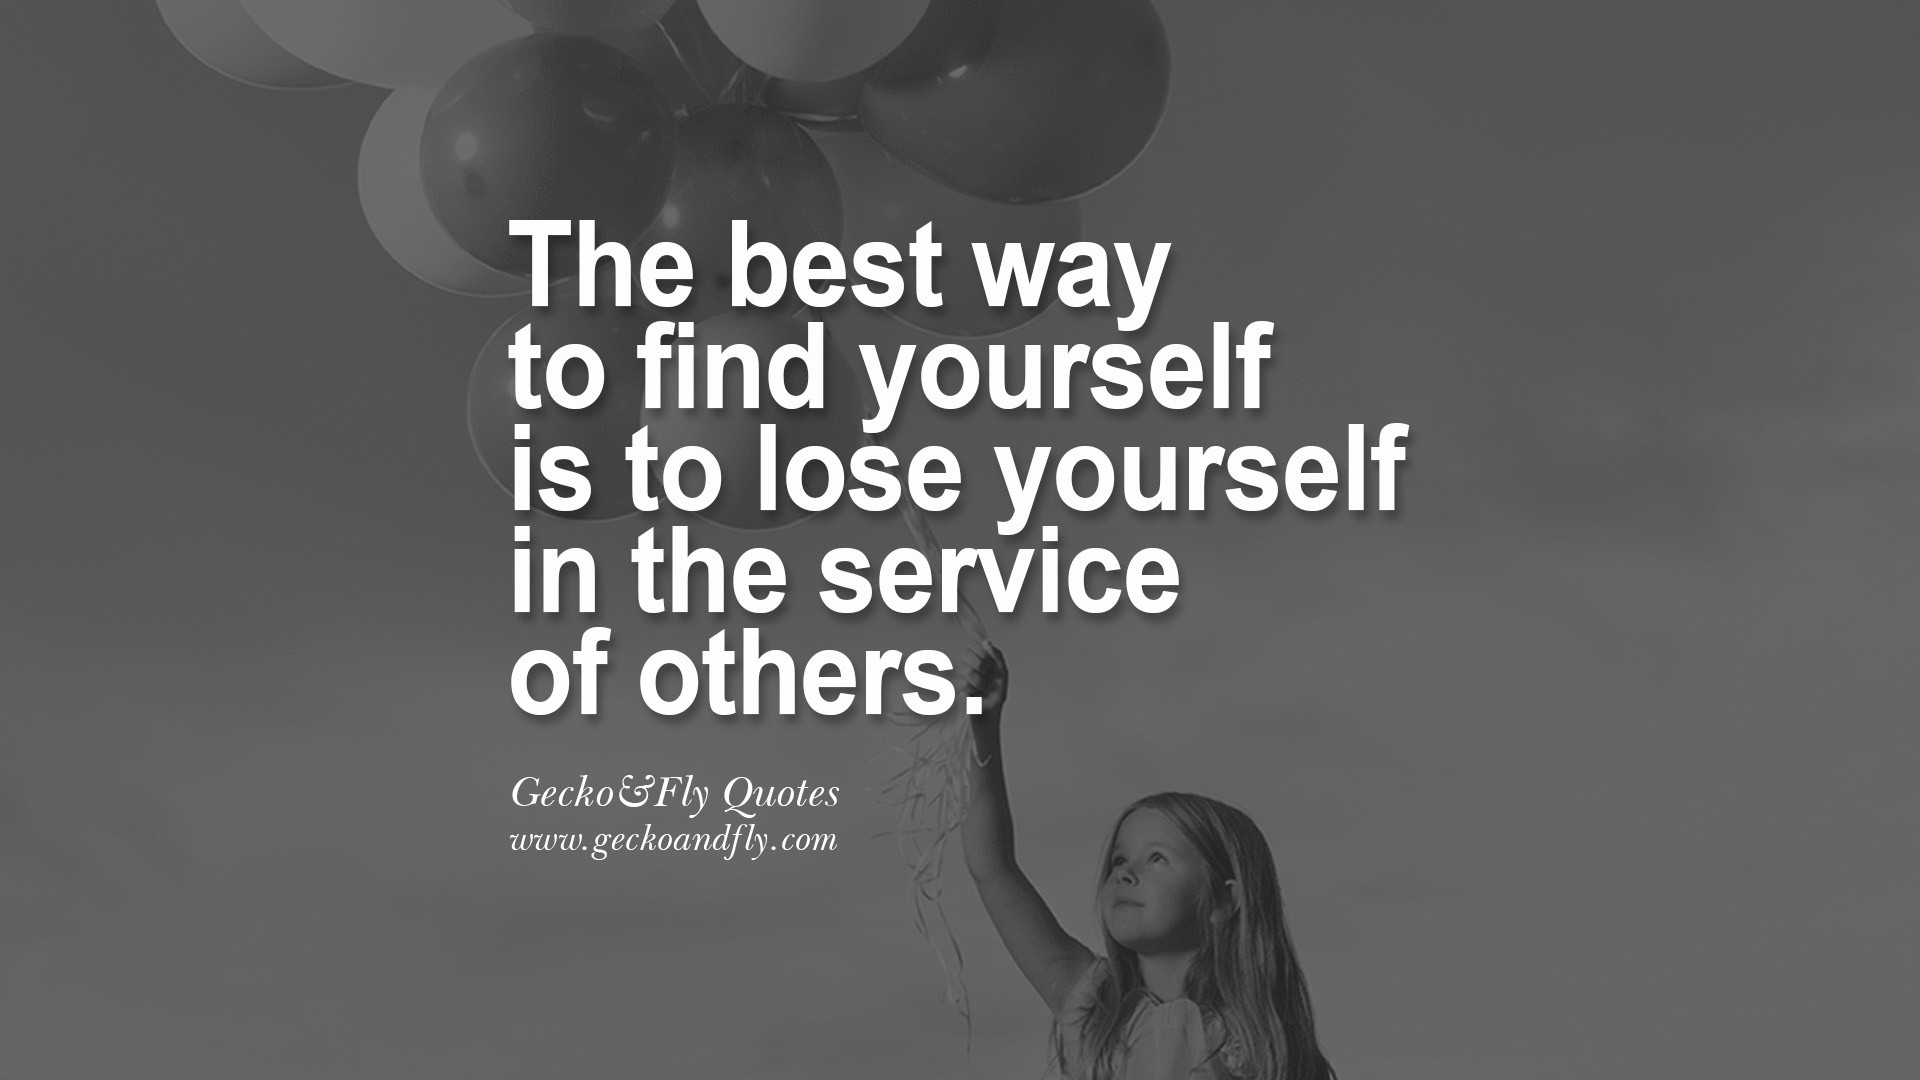 Social Work Quotes Inspirational
 Quotes About Social Work QuotesGram